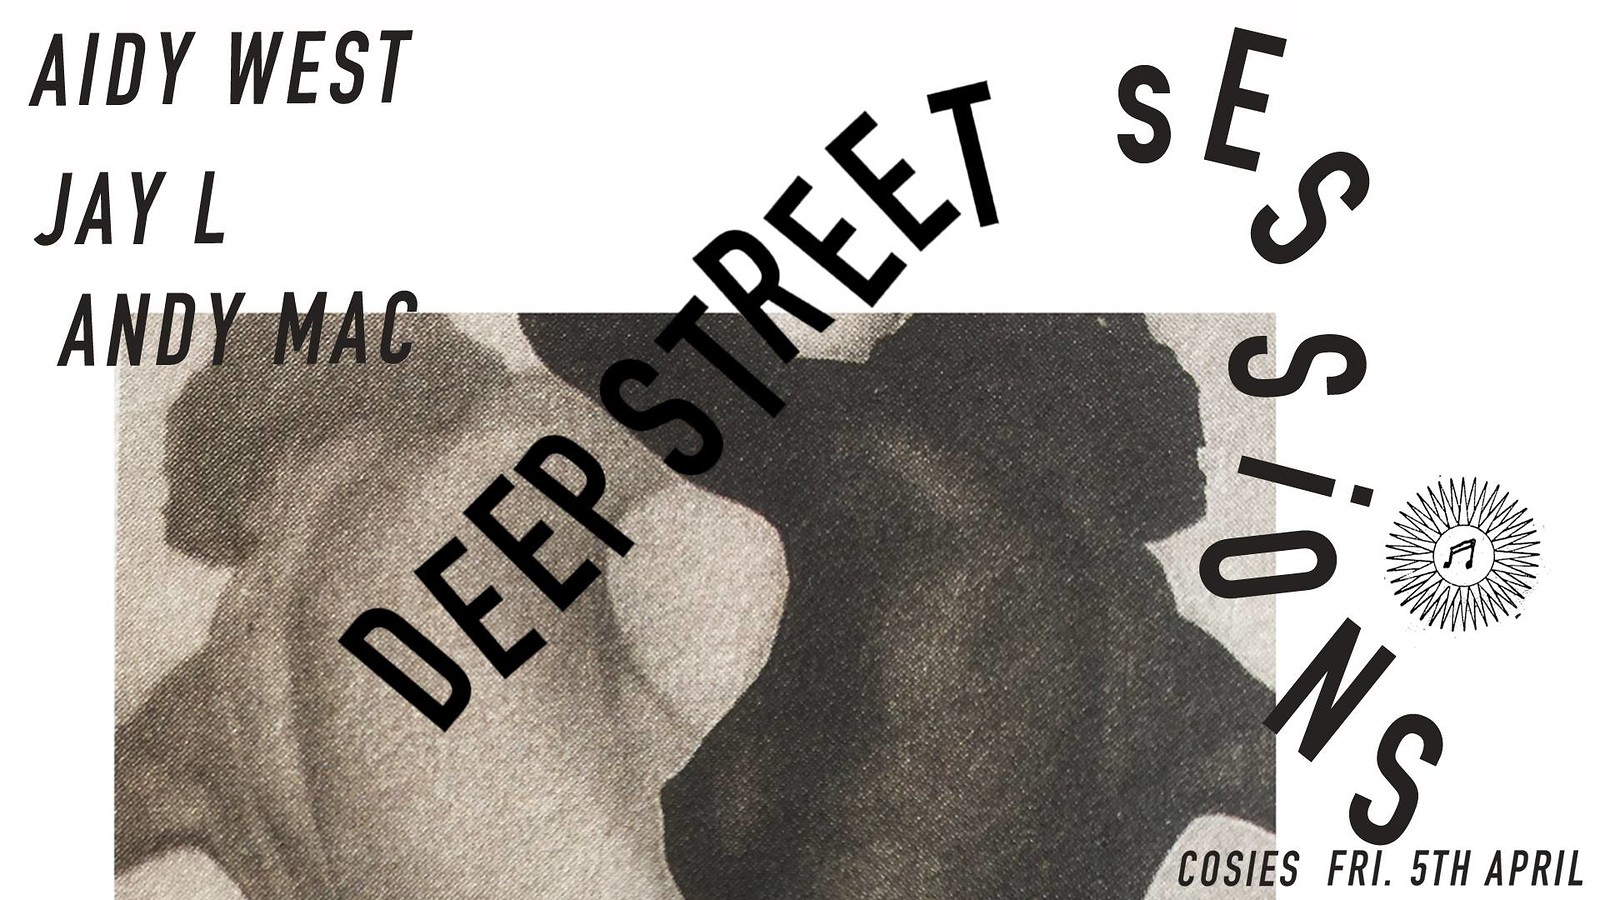 Deep Street sessions at Cosies